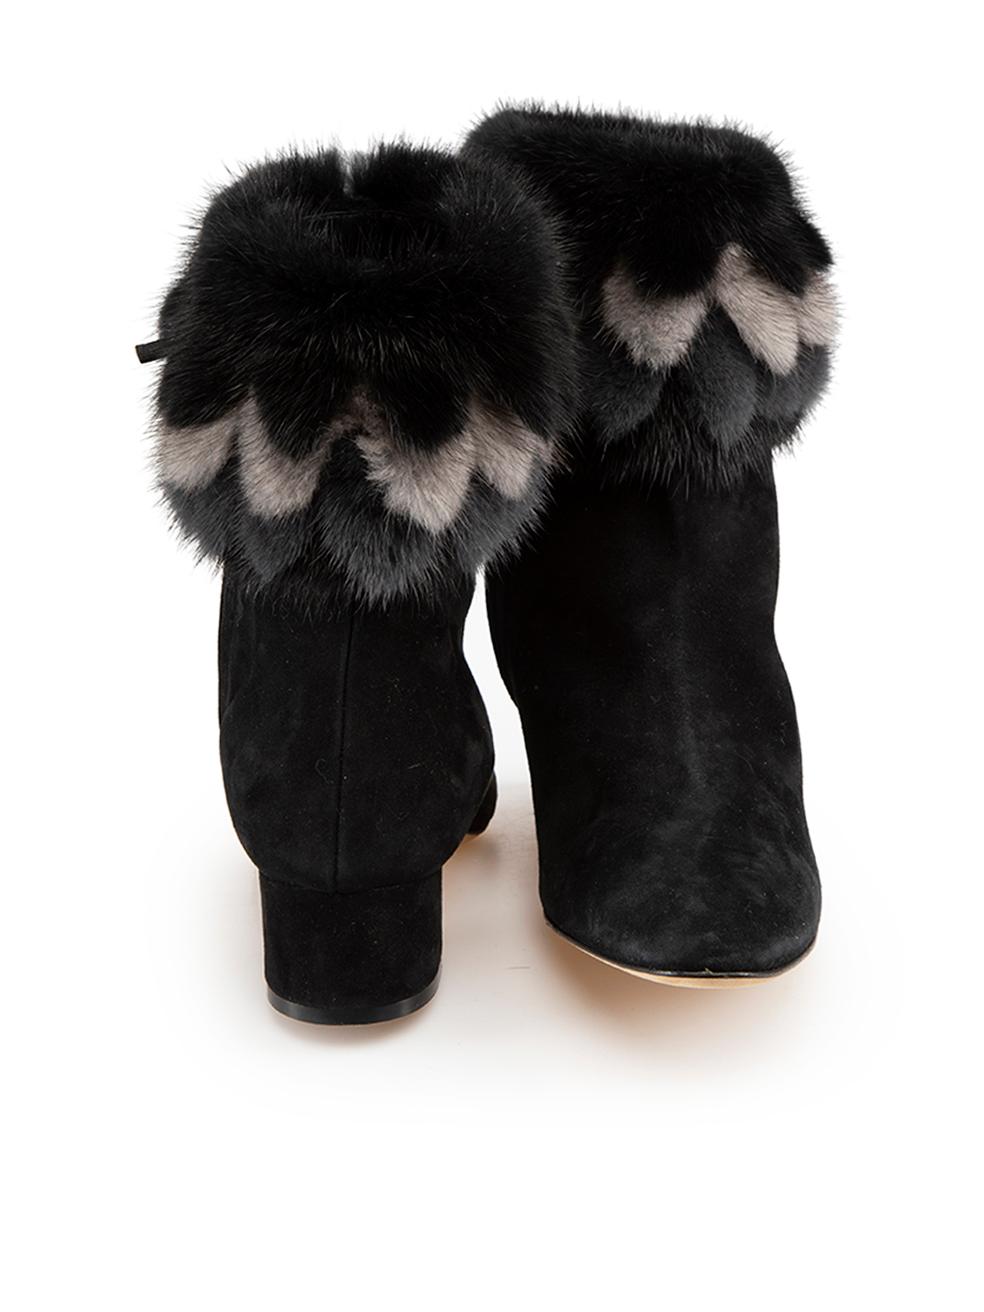 Manolo Blahnik Black Suede Fur Trim Ankle Boots Size IT 38.5 In Good Condition For Sale In London, GB